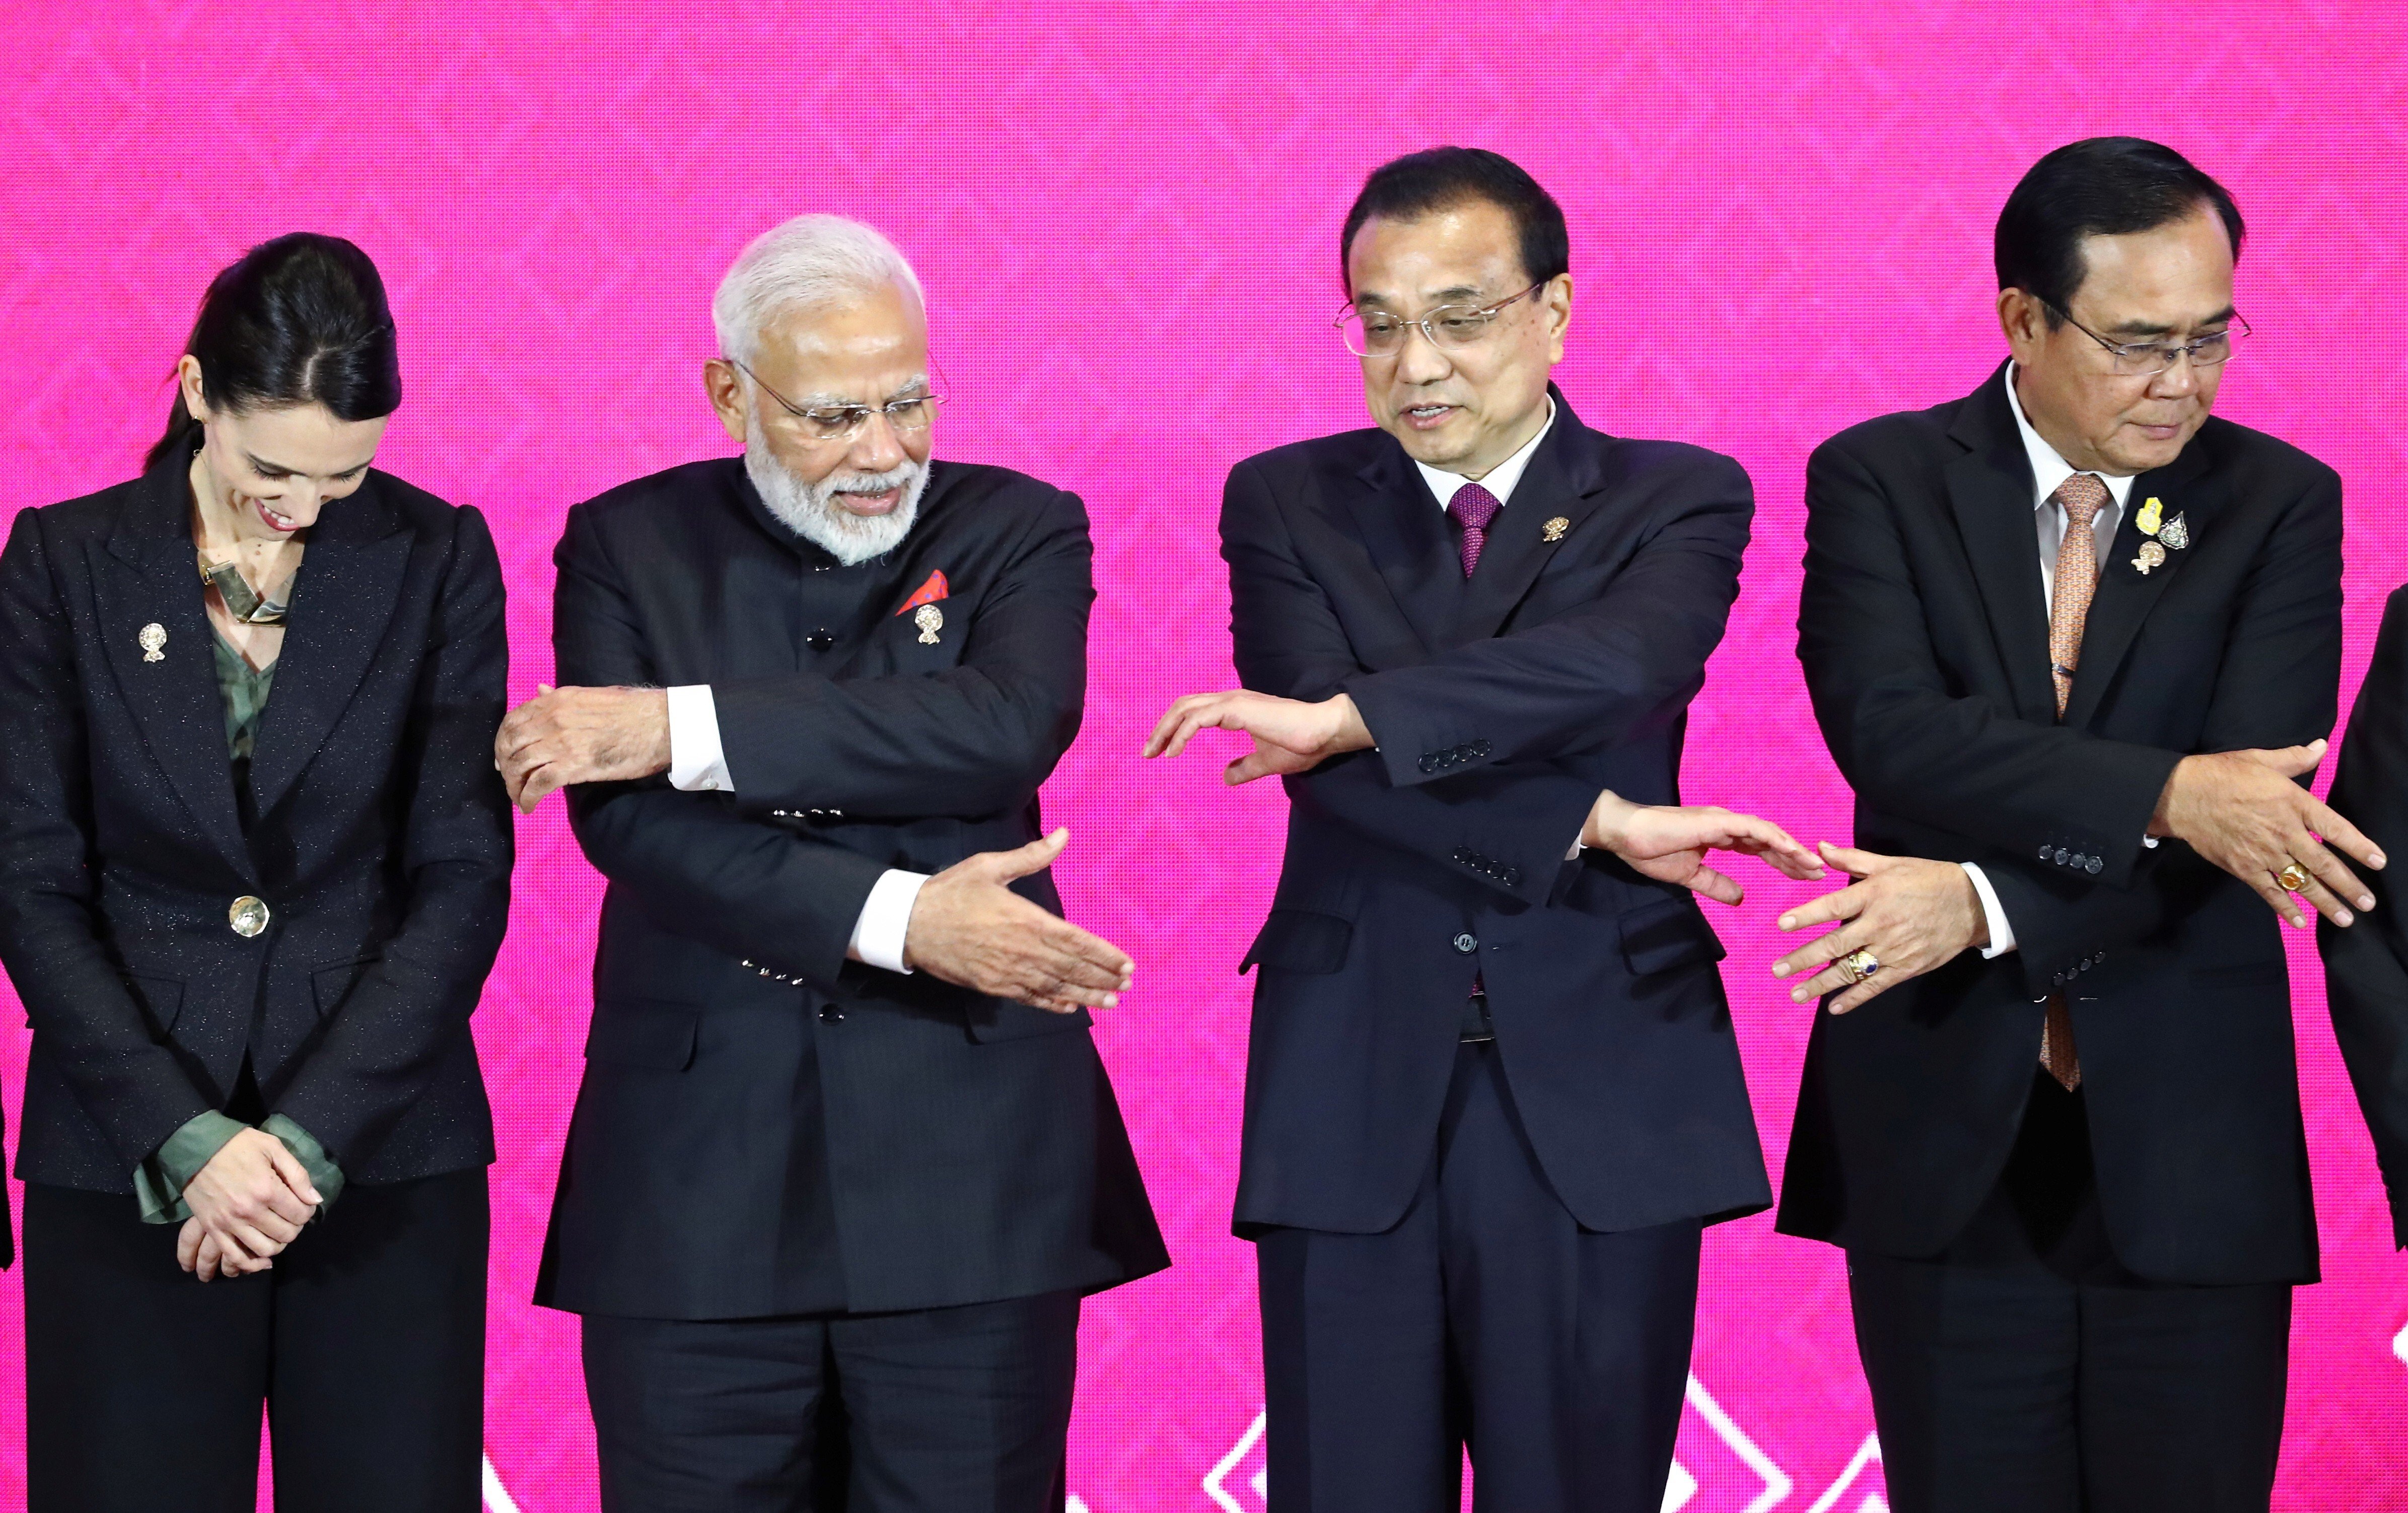 New Zealand’s Prime Minister Jacinda Ardern, India’s Prime Minister Narendra Modi, Chinese Premier Li Keqiang and Thai Prime Minister Prayuth Chan-ocha attempt to link hands at the third Regional Comprehensive Economic Partnership summit in Bangkok, Thailand, on November 4, 2019. Photo: Reuters